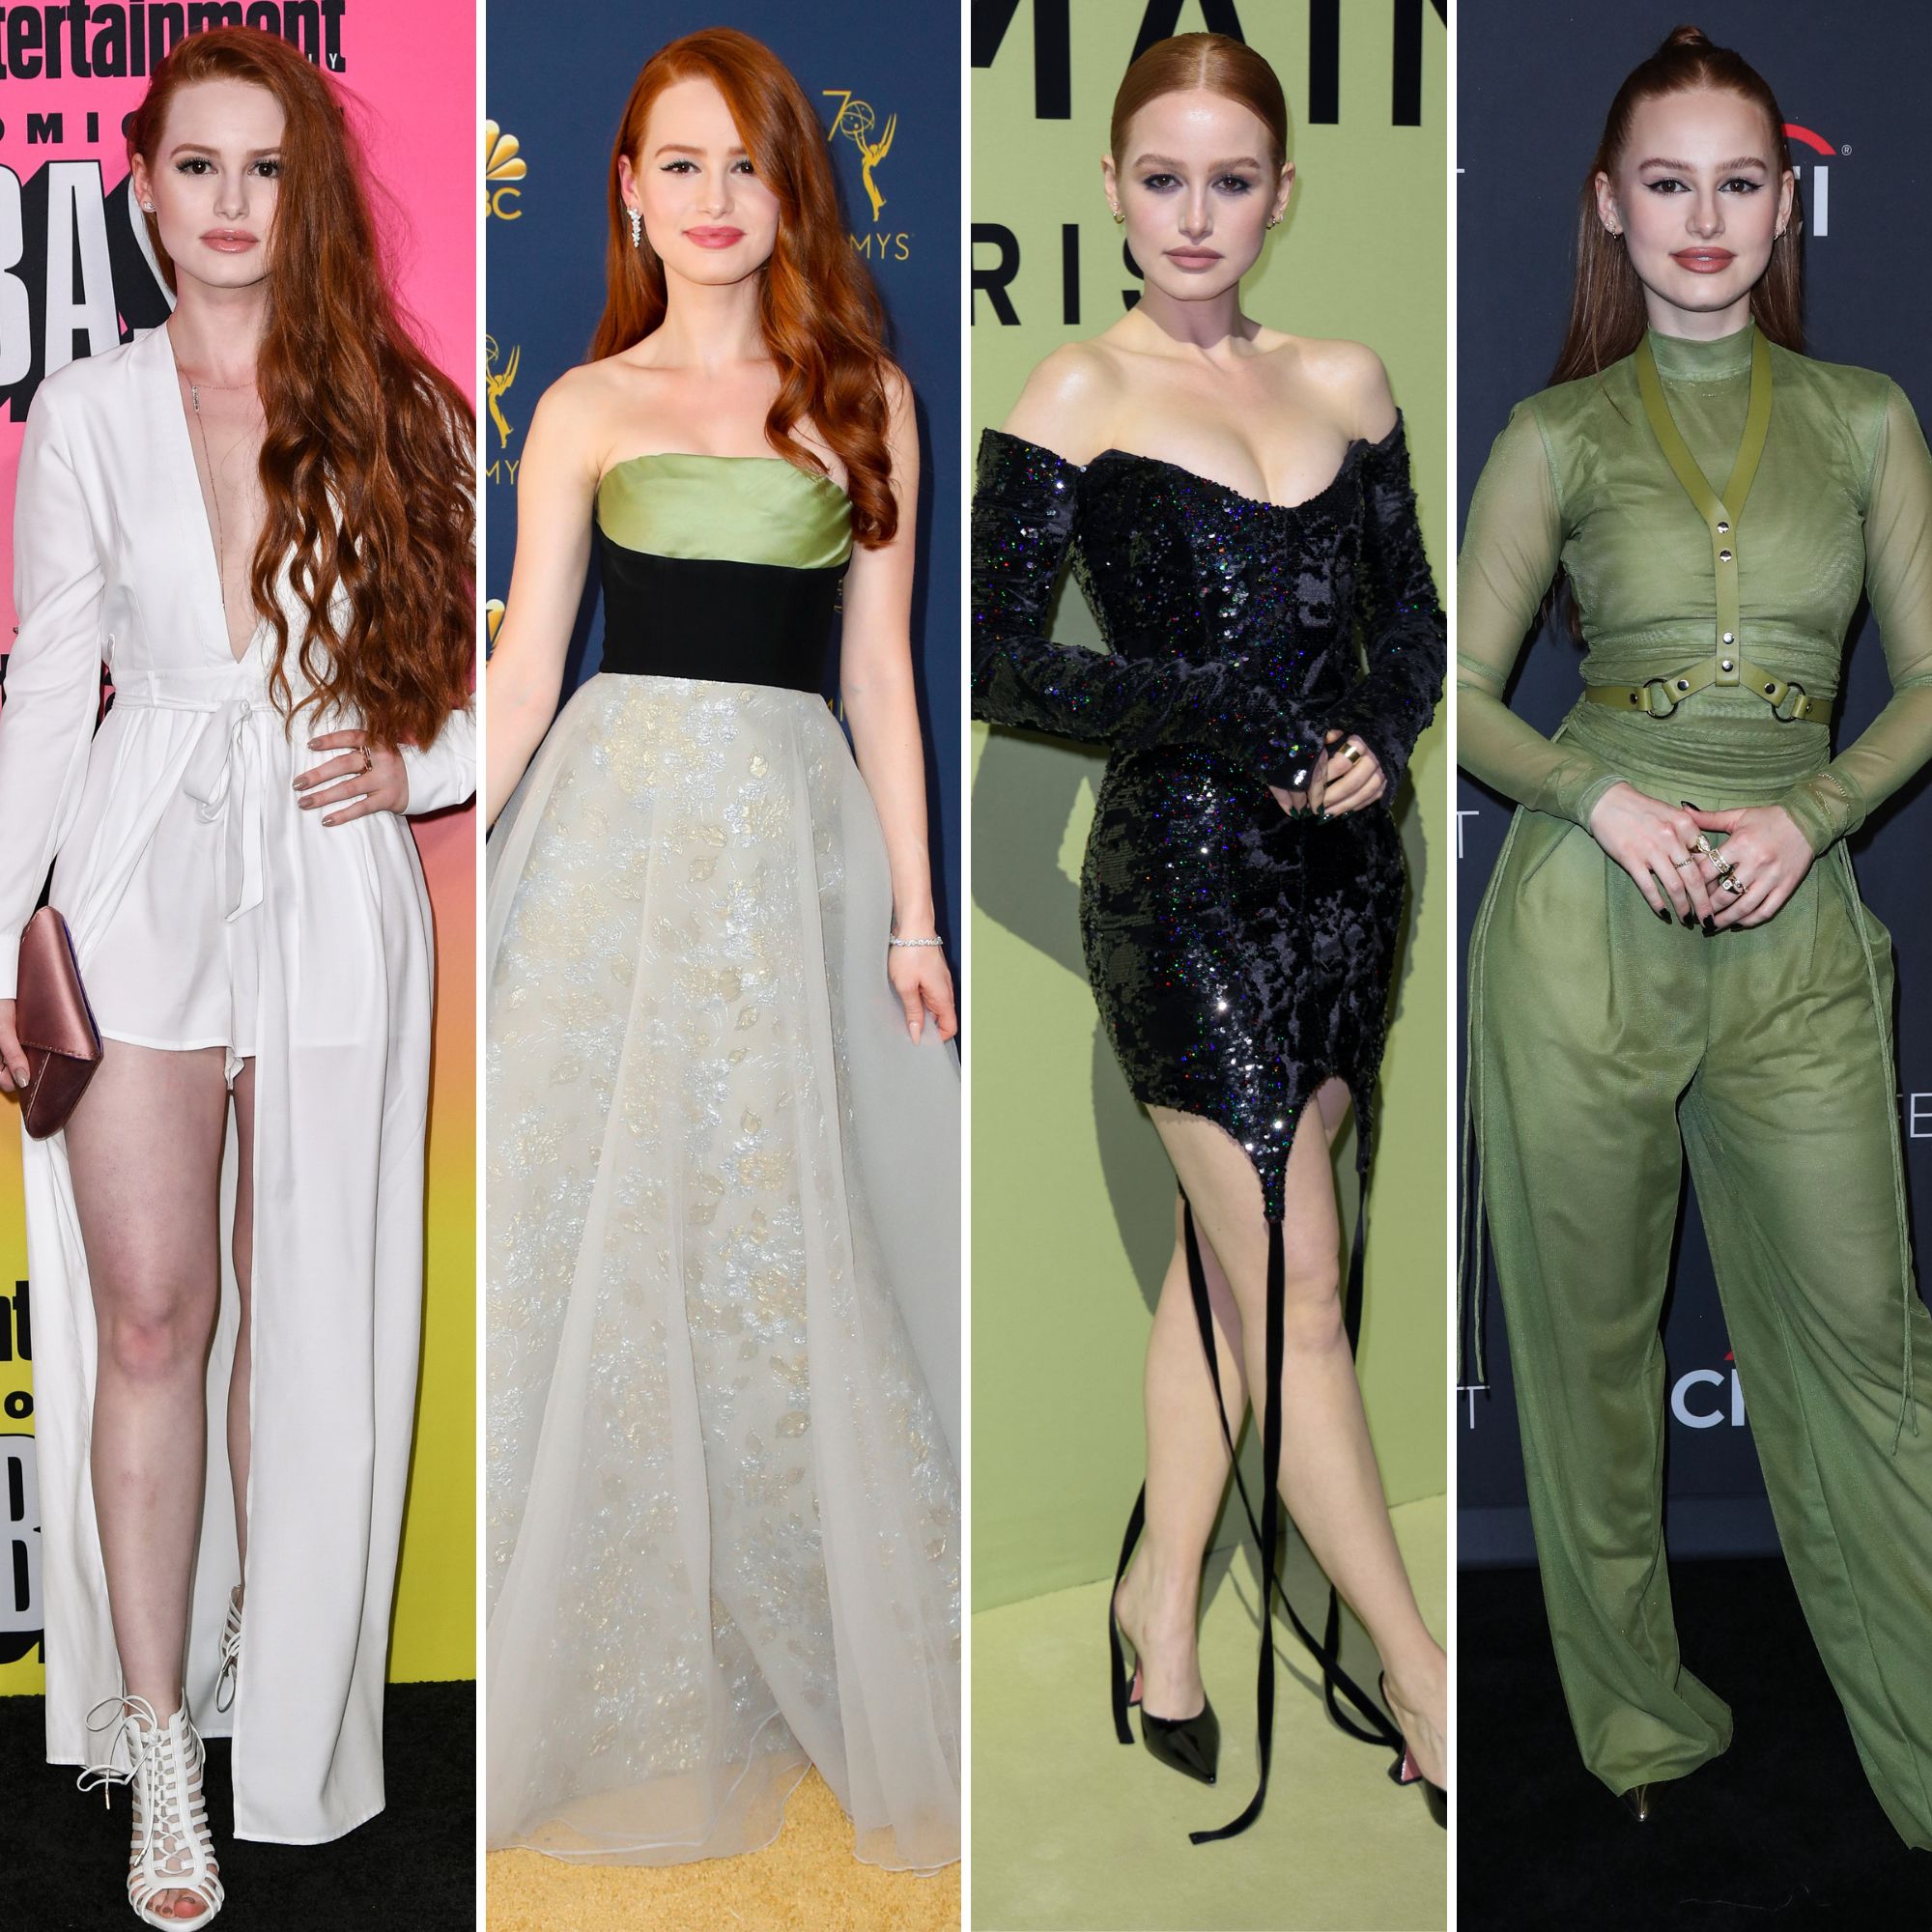 Madelaine Petsch Red Carpet Transformation — The ‘Riverdale’ Star’s Best Looks Over the Years